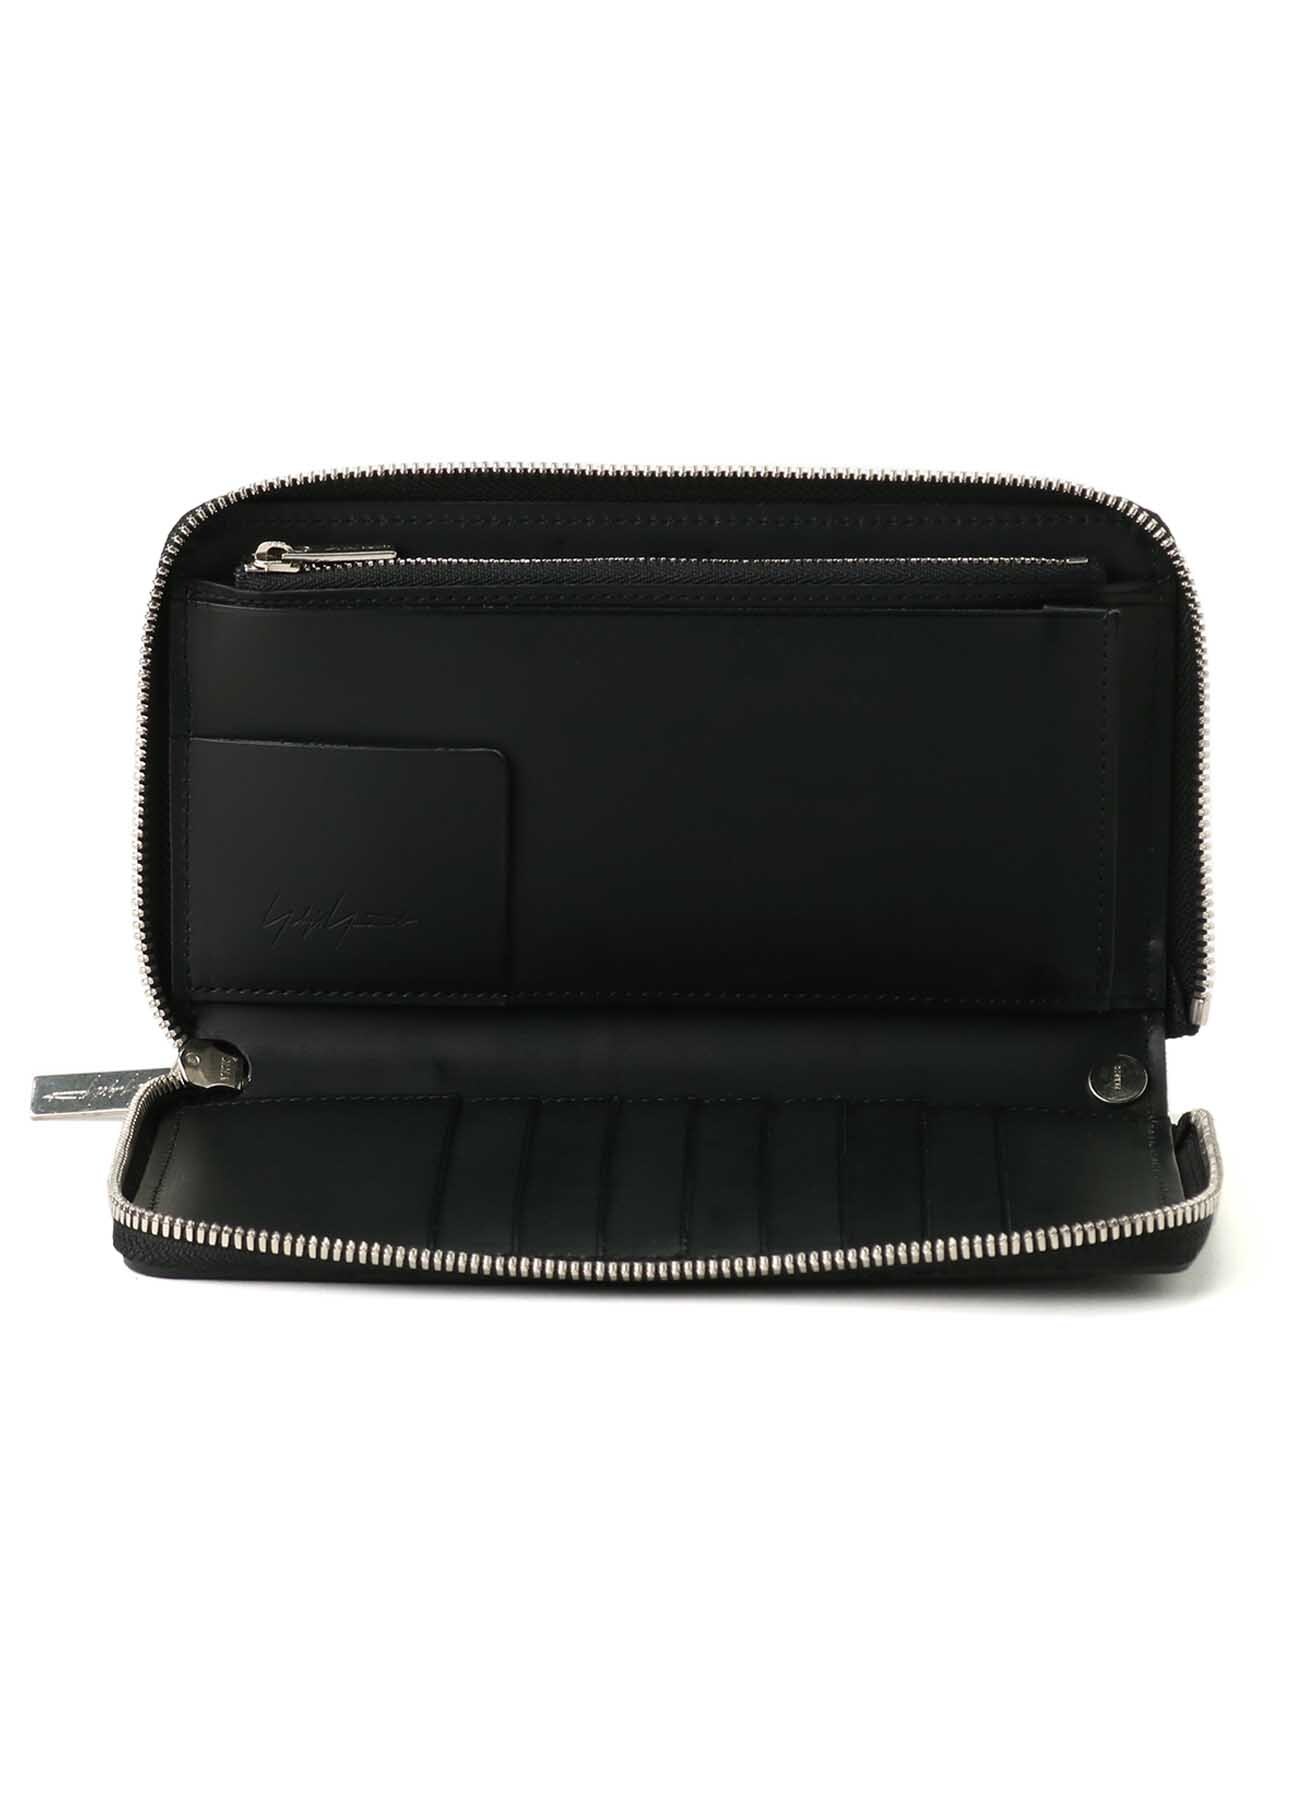 THICK NATURAL FASTENER WALLET L